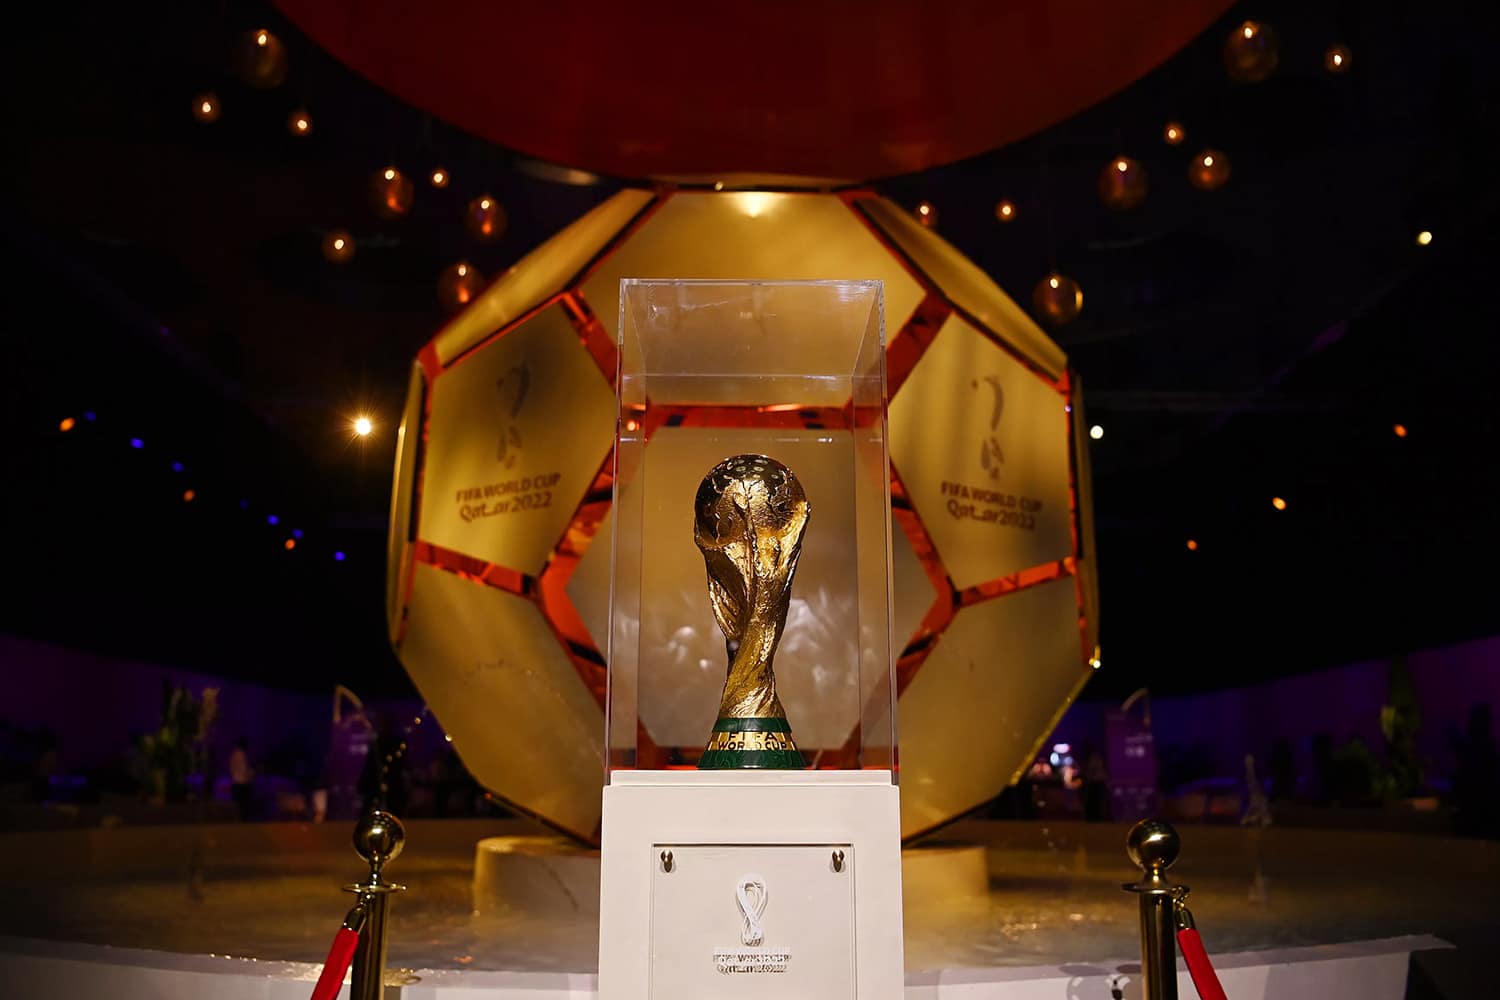 Which Teams Have Qualified For FIFA World Cup Qatar 2022?